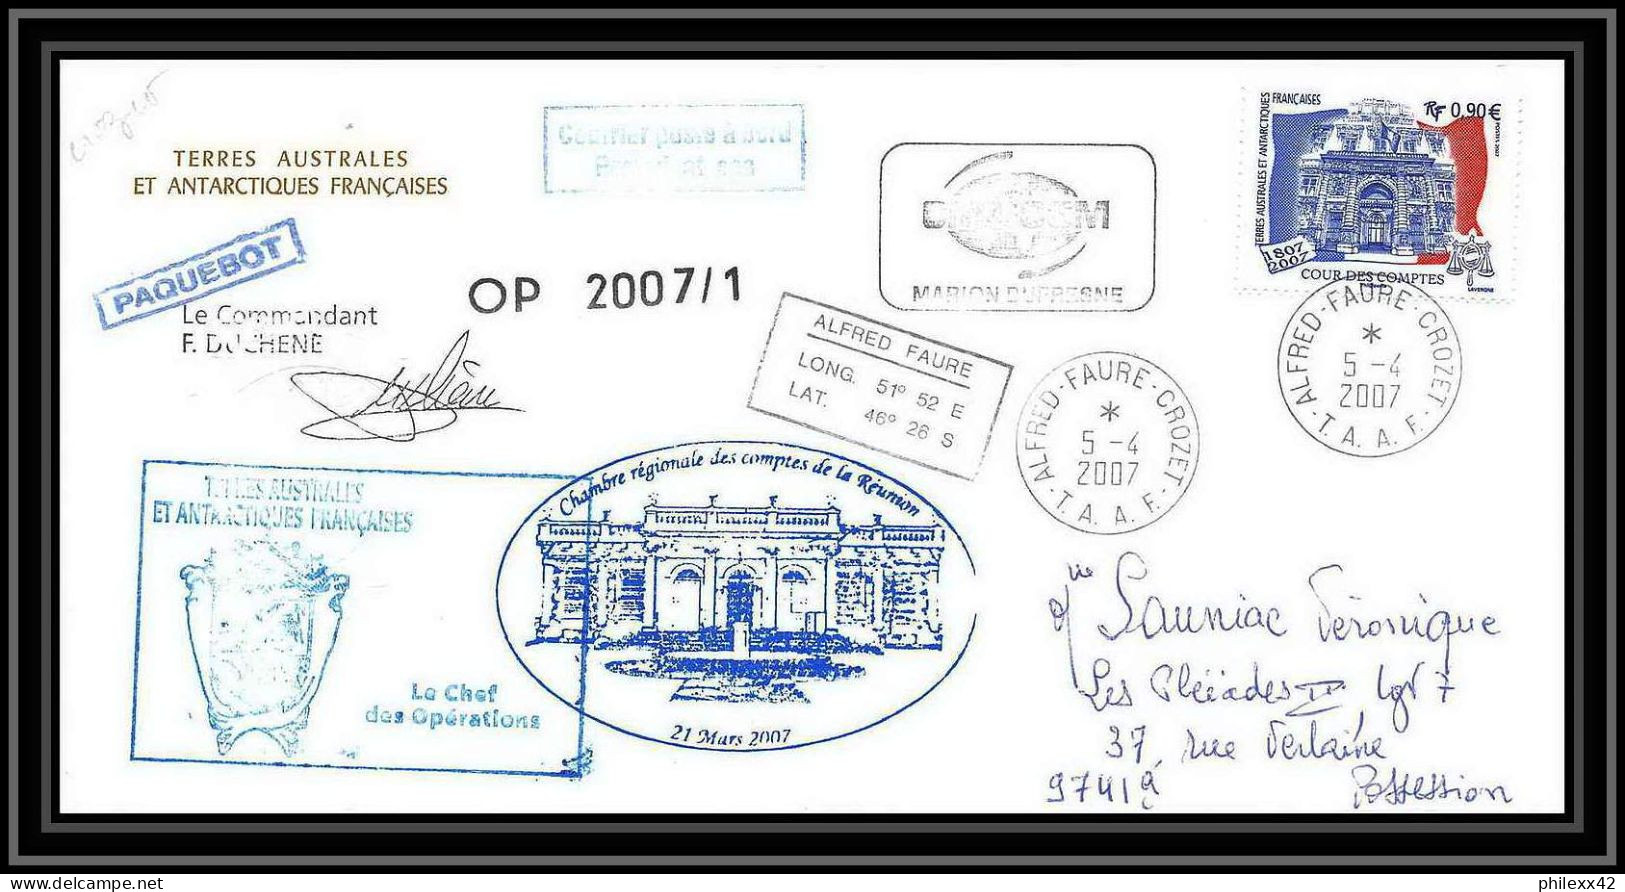 2672 ANTARCTIC Terres Australes TAAF Lettre Cover Dufresne 2 Signé Signed Op 2007/1 Crozet 5/4/2007 N°471 - Covers & Documents